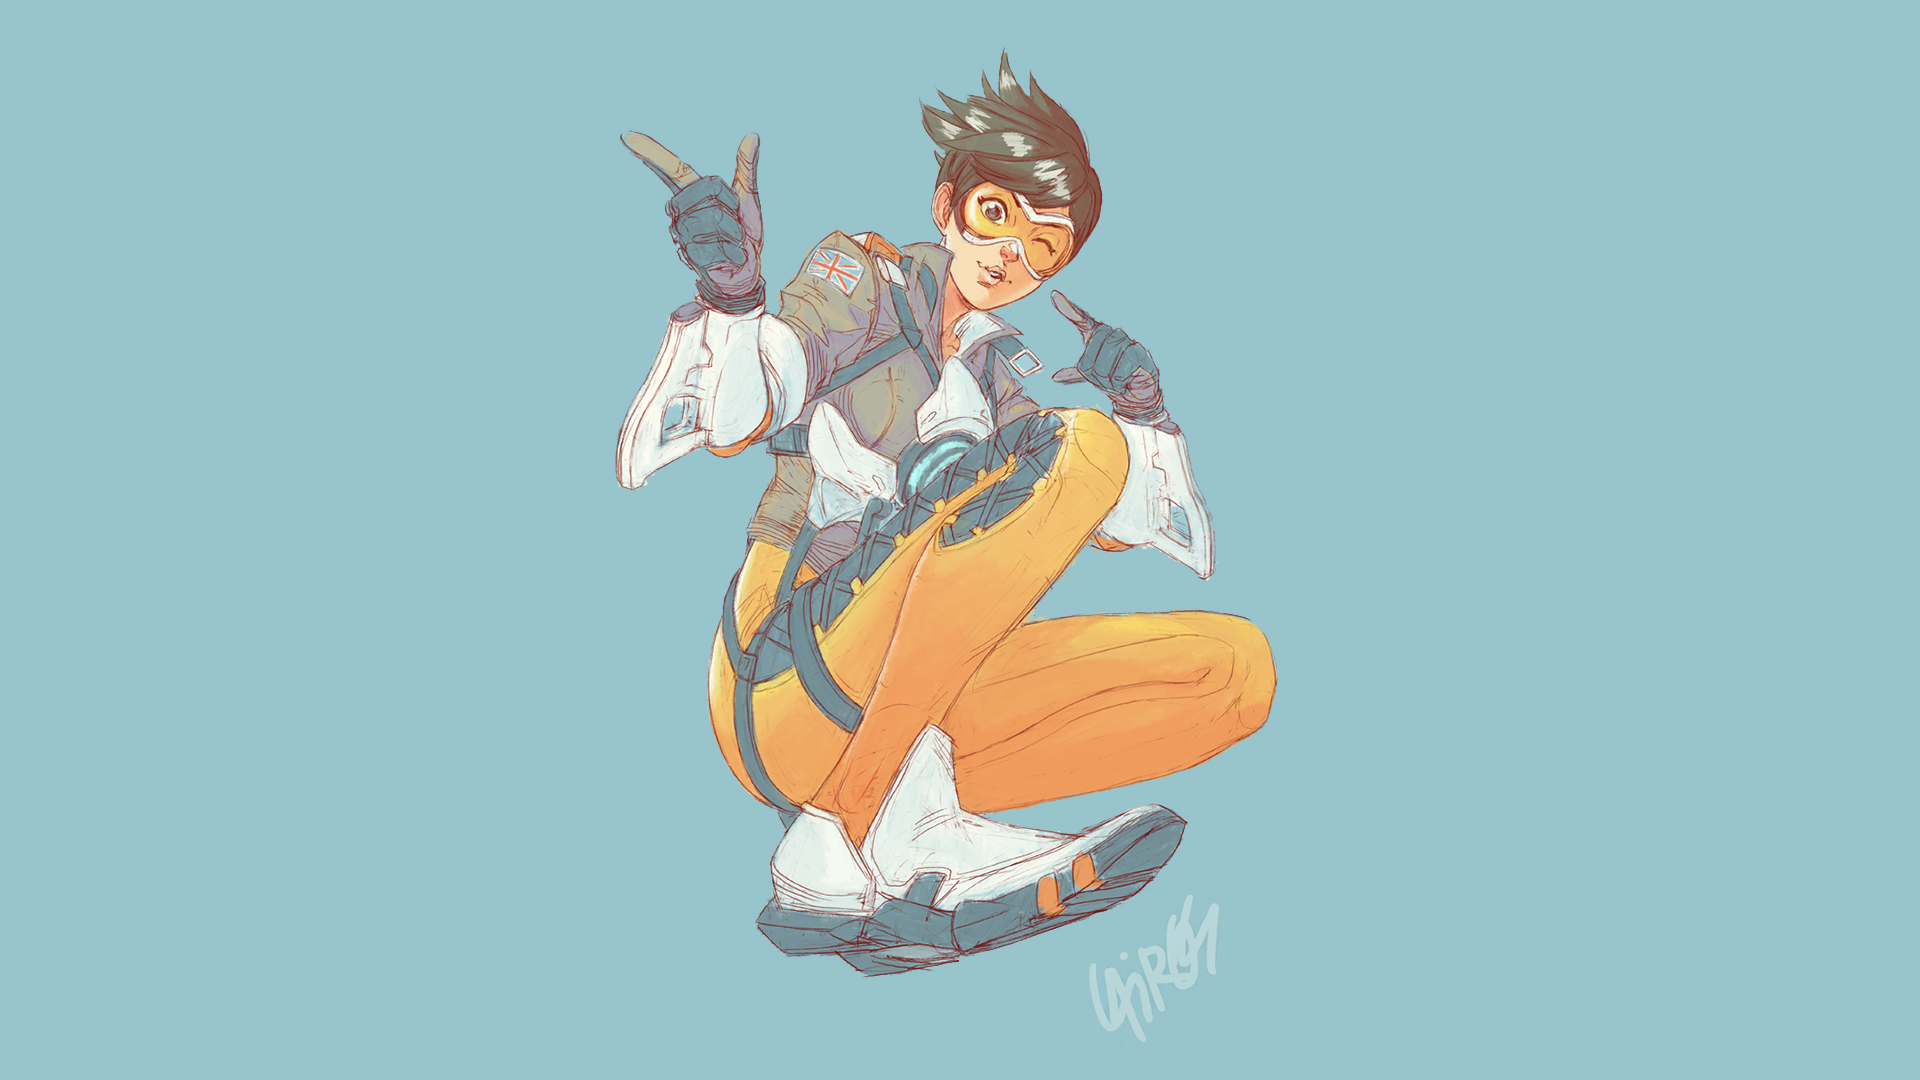 General 1920x1080 Overwatch Tracer (Overwatch) video game characters drawing fan art simple background digital art